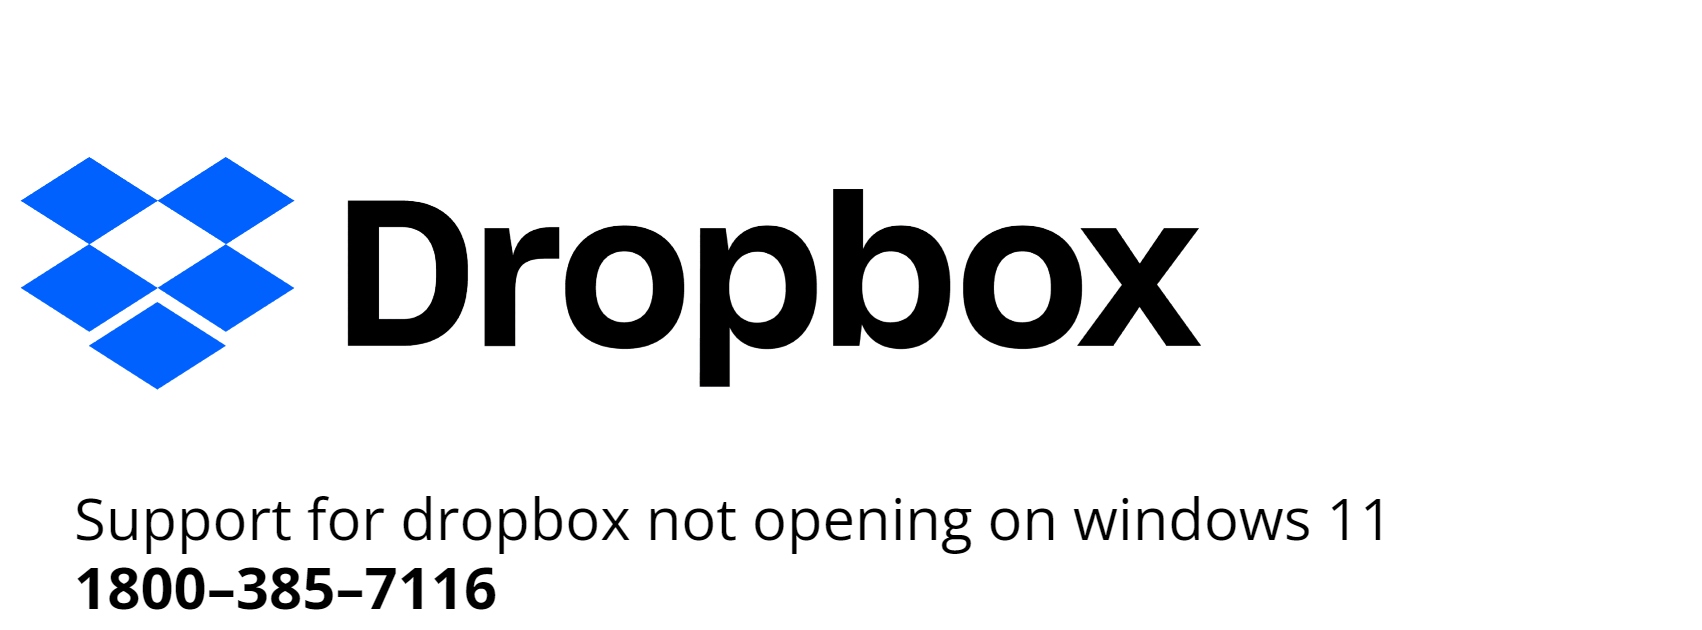 support for dropbox